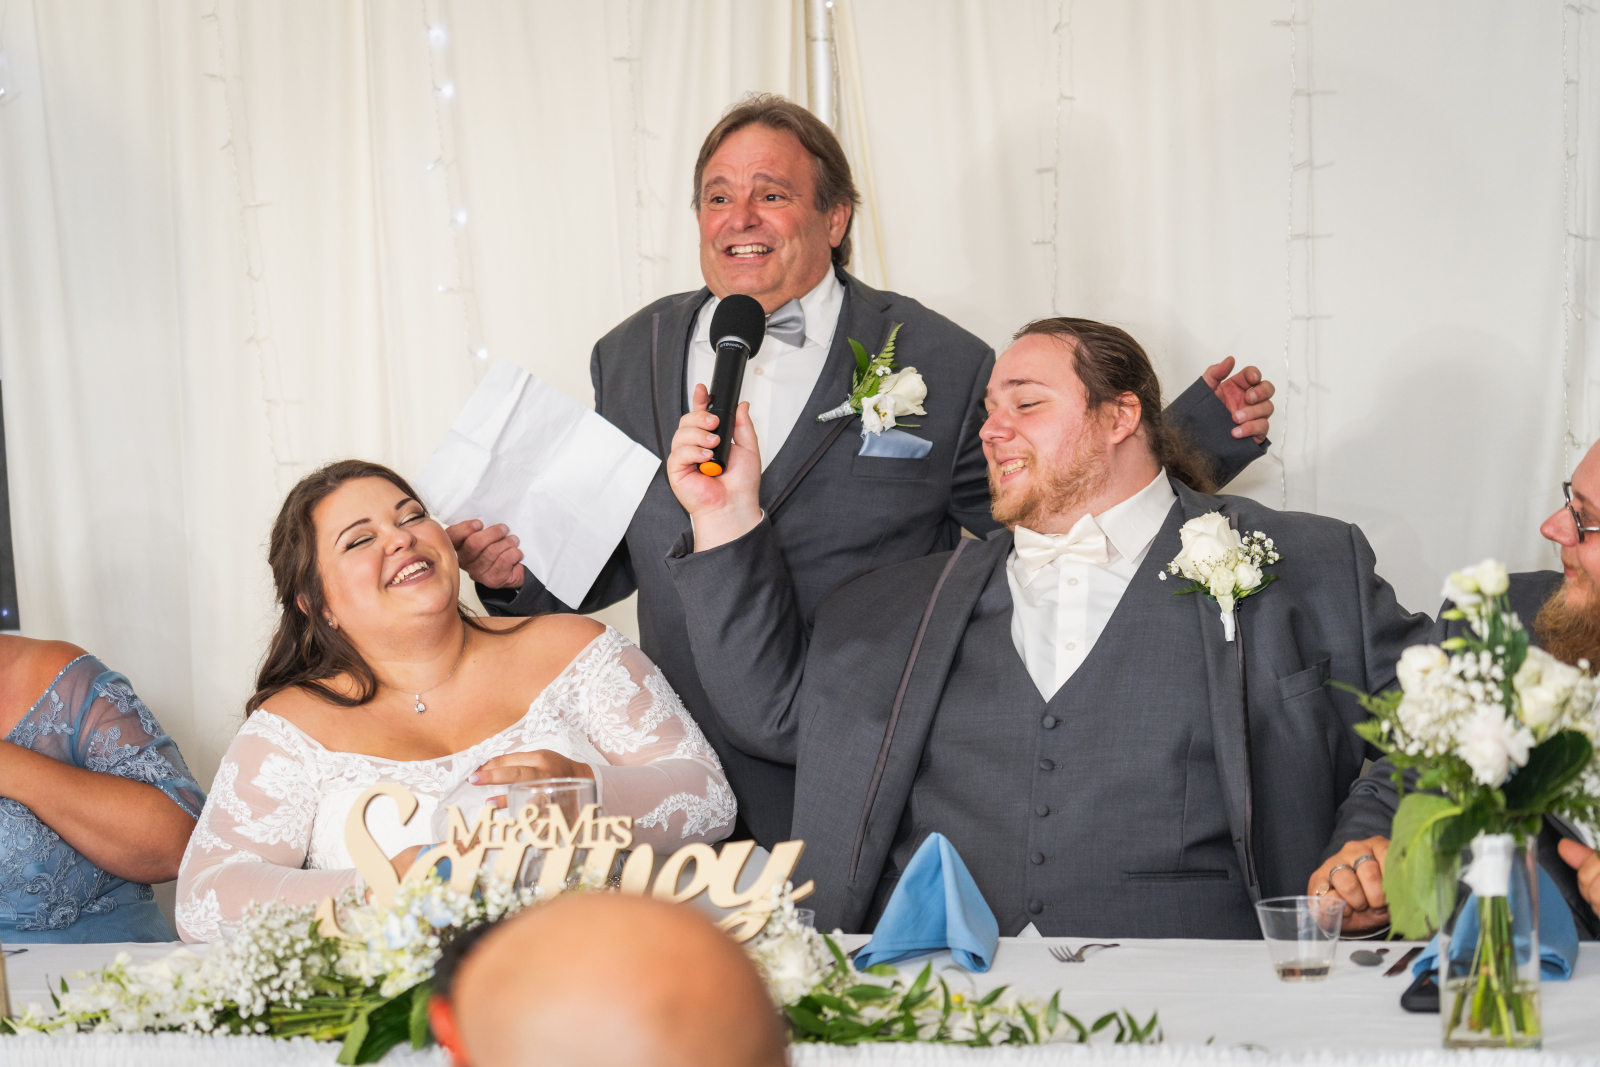 Father of the bride speech, wedding speech, wedding toast, bride and groom laughing, head table, September wedding reception at Westfall Event Center